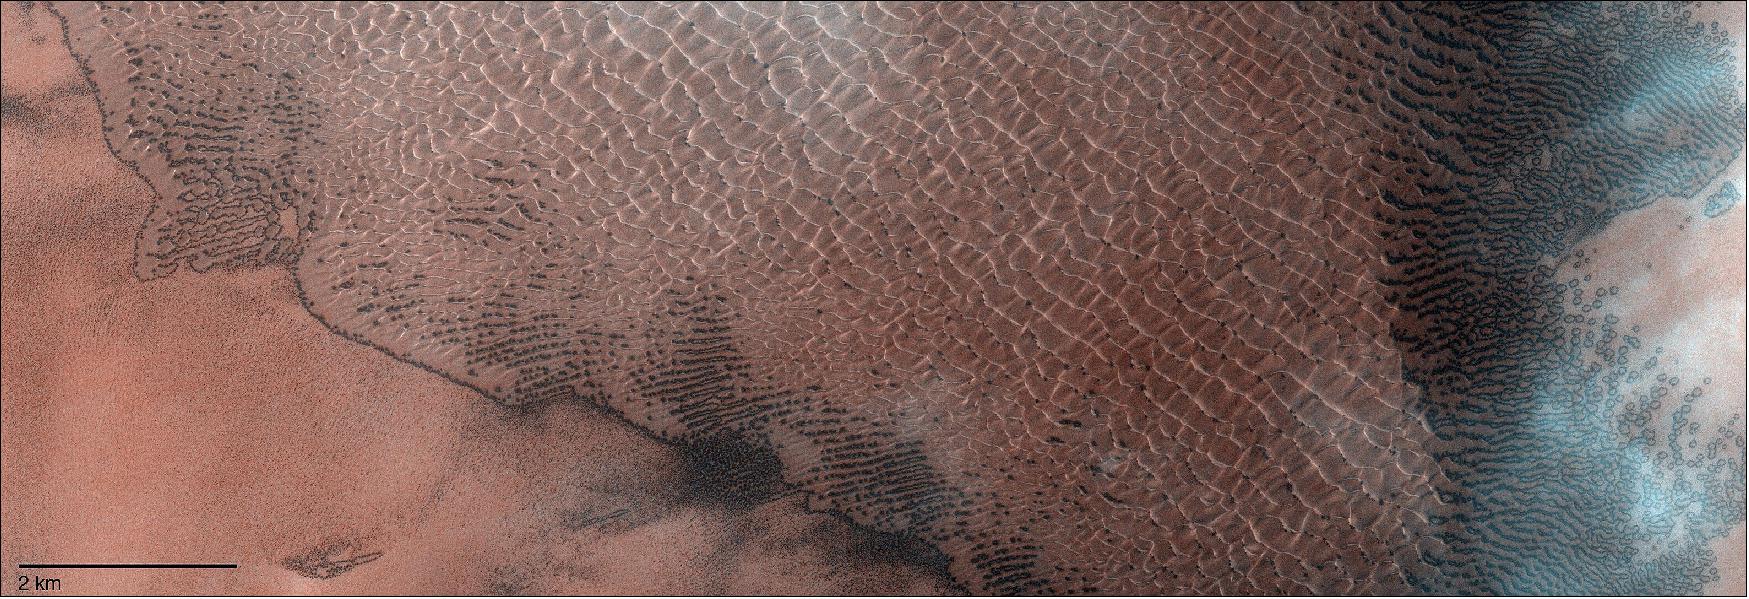 Figure 25: This spectacular dune field sits in the centre of Lomonosov crater, deep in the southern hemisphere of Mars (65ºS, 351ºE). It was imaged by the CaSSIS camera on the ESA-Roscosmos ExoMars Trace Gas Orbiter (TGO) on 2 December, 2020. The image was released on the occasion of the five year launch anniversary of the mission (image credit: ESA/Roscosmos/CaSSIS, CC BY-SA 3.0 IGO)